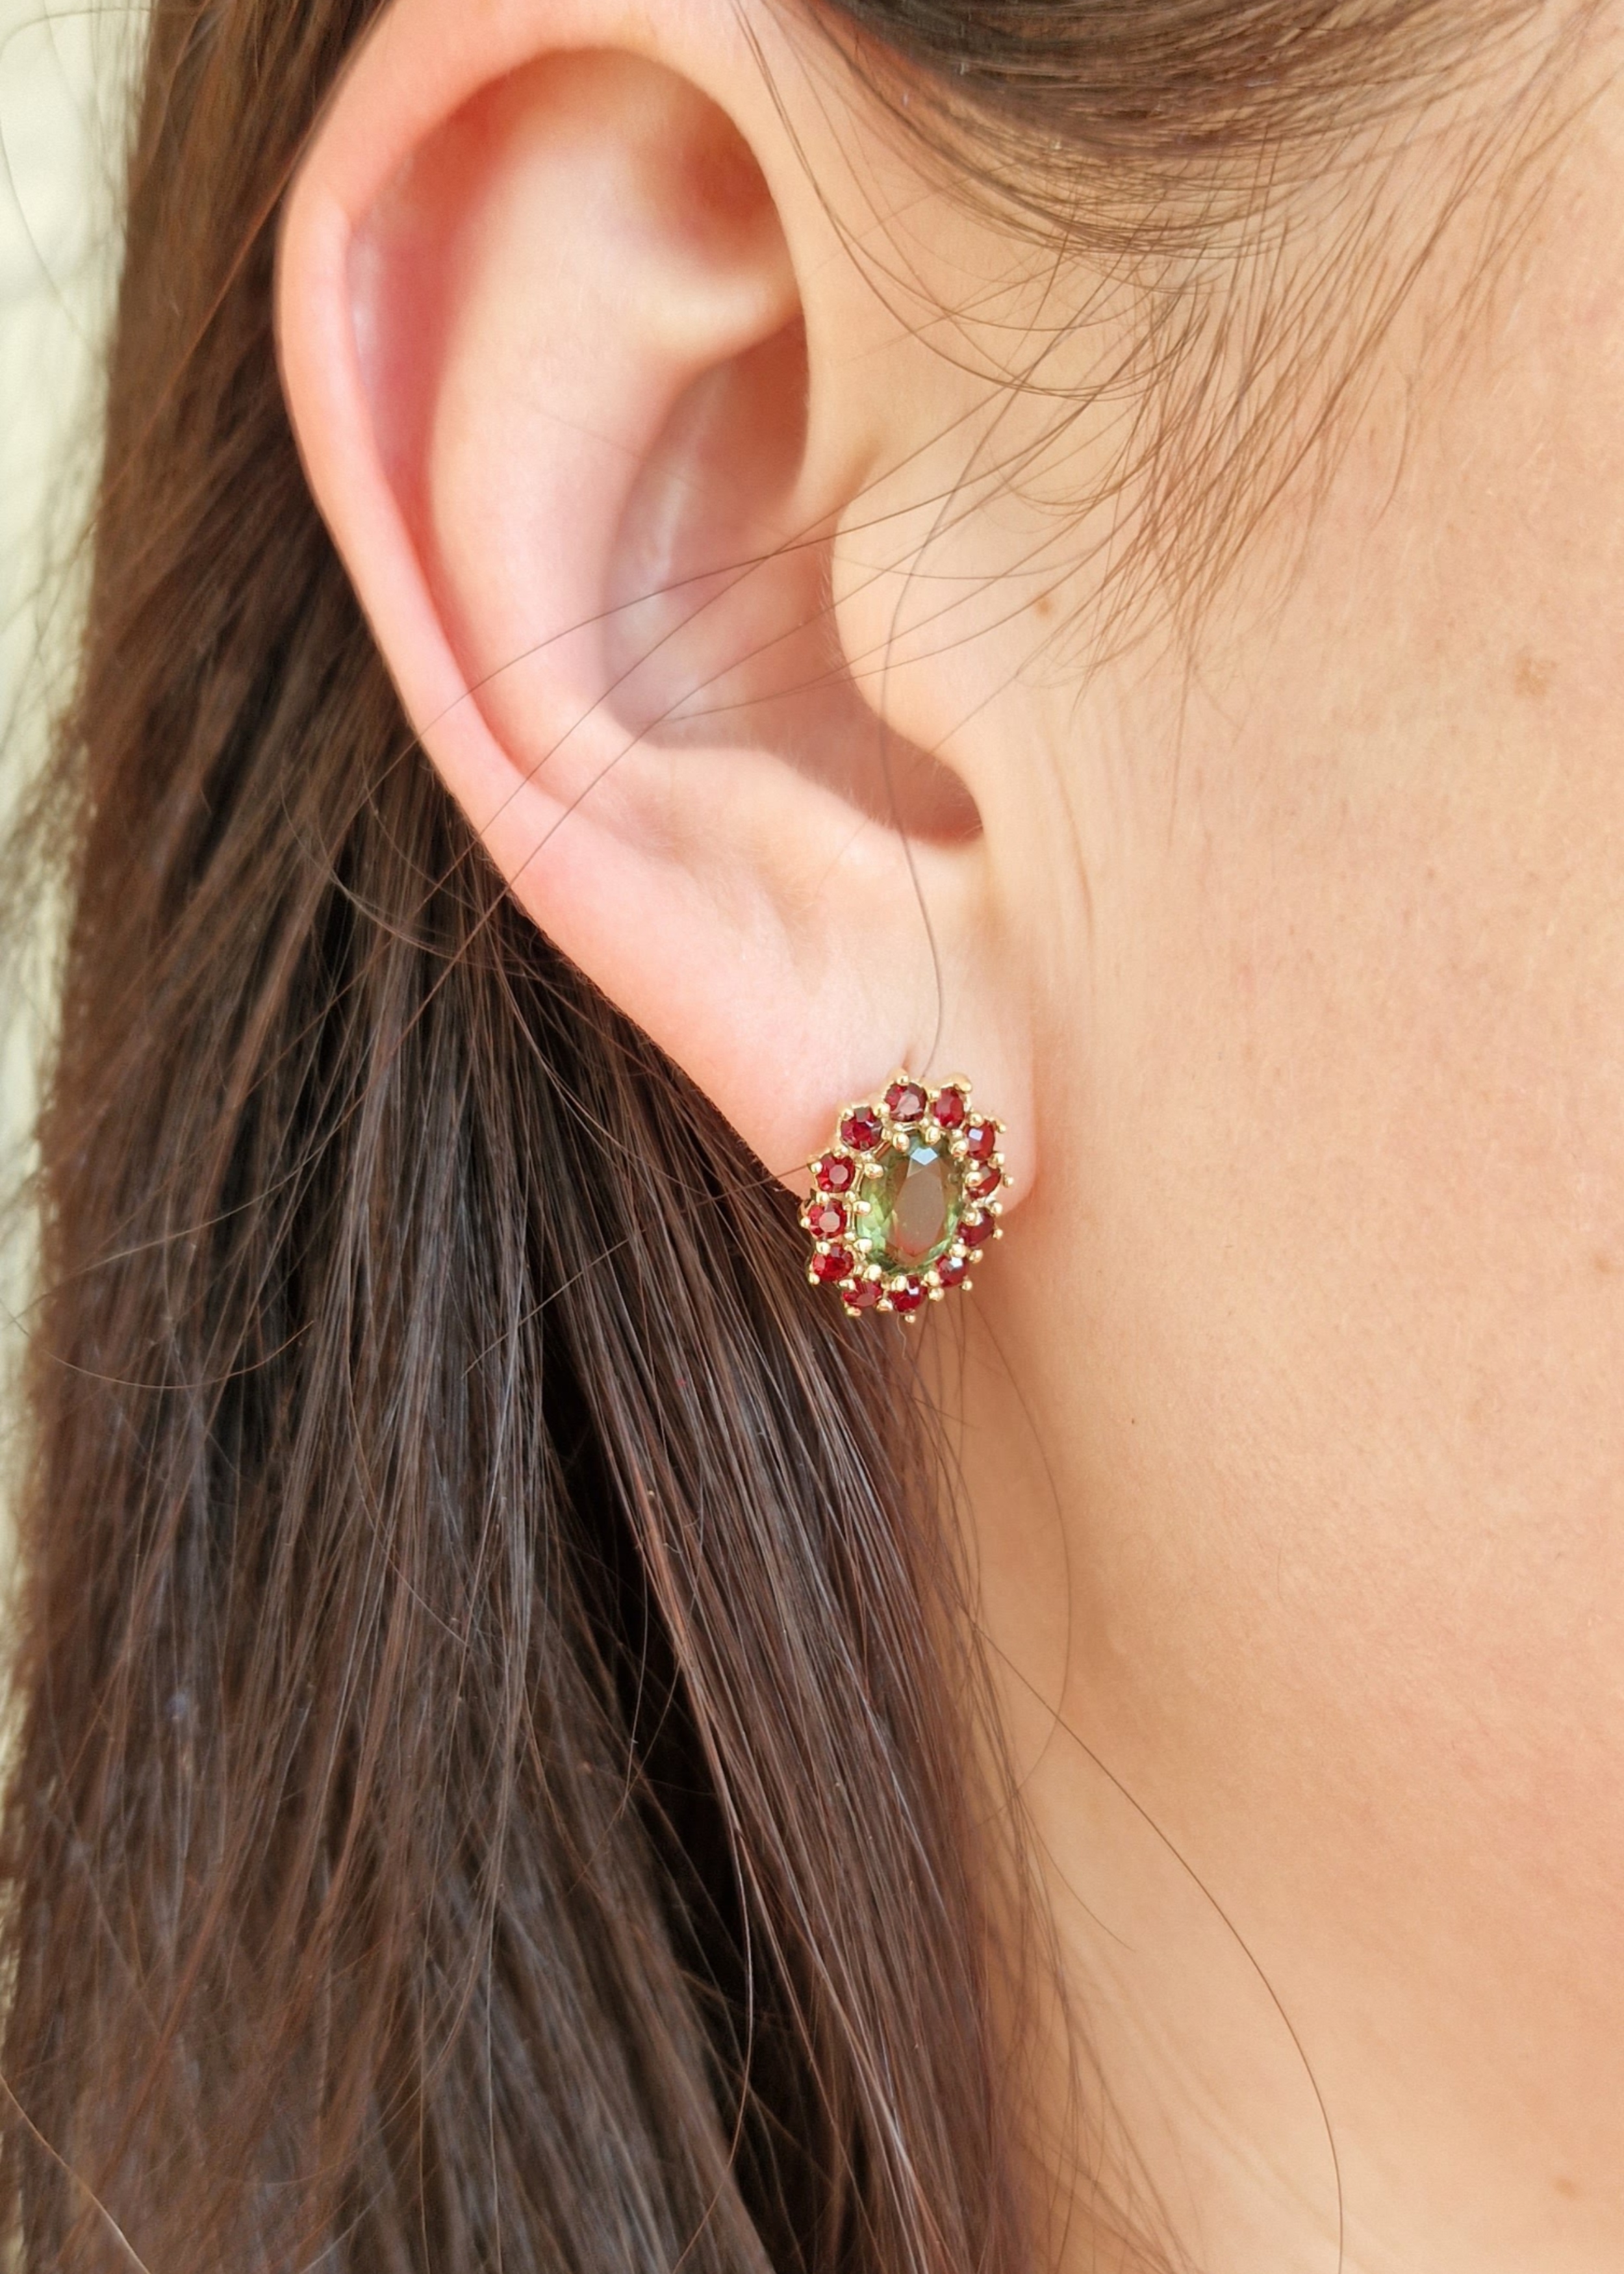 Brilliant camellia earrings】Two ways to wear red camellia